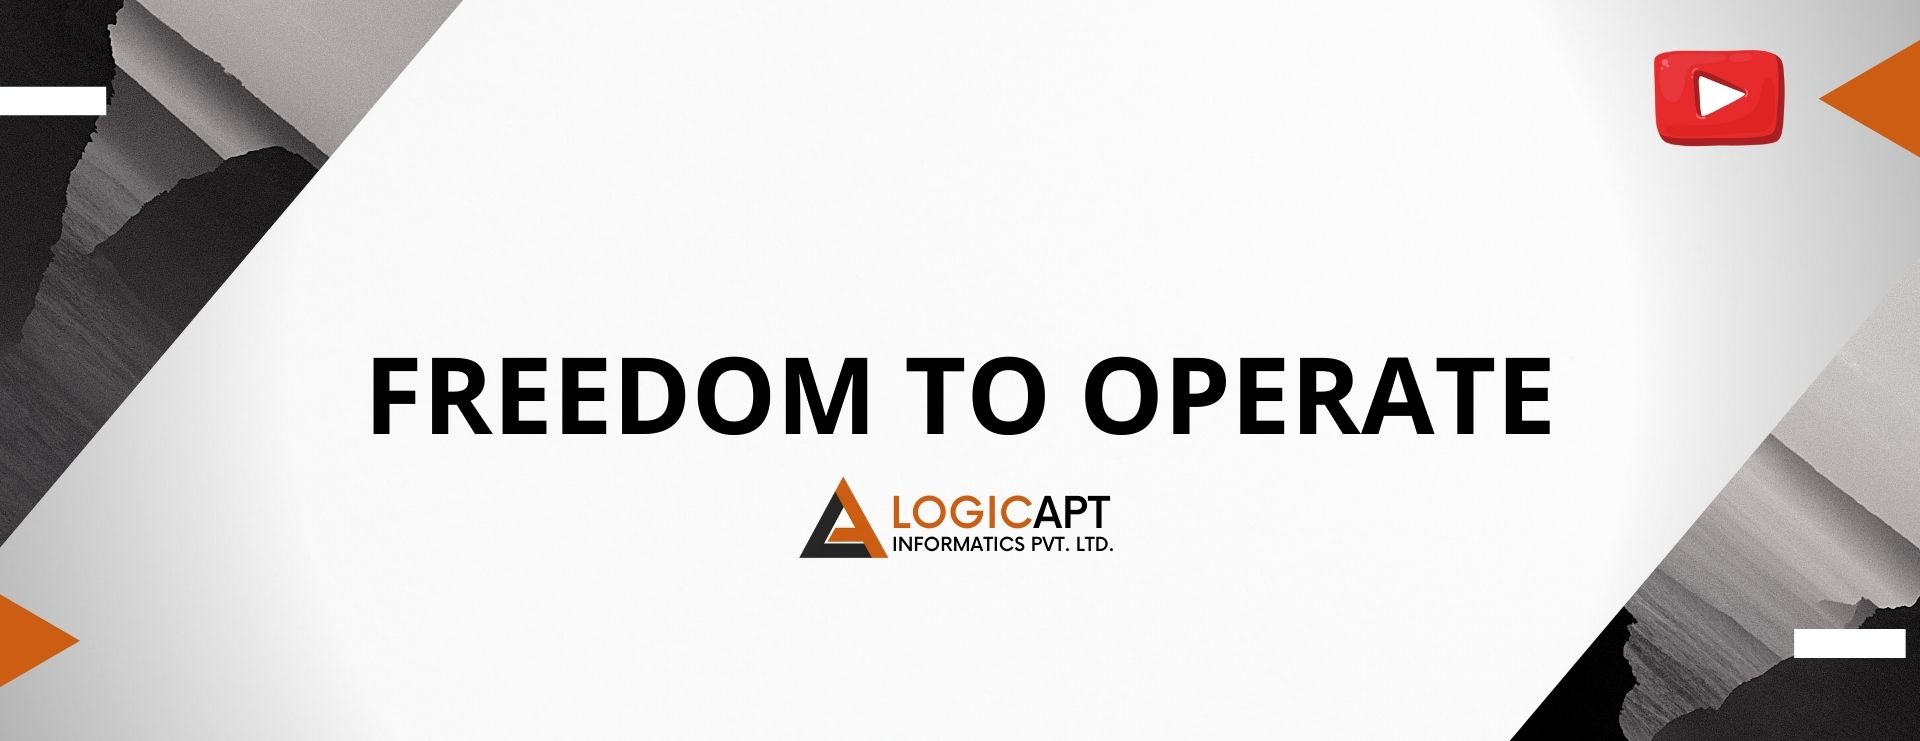 Freedom To Operate